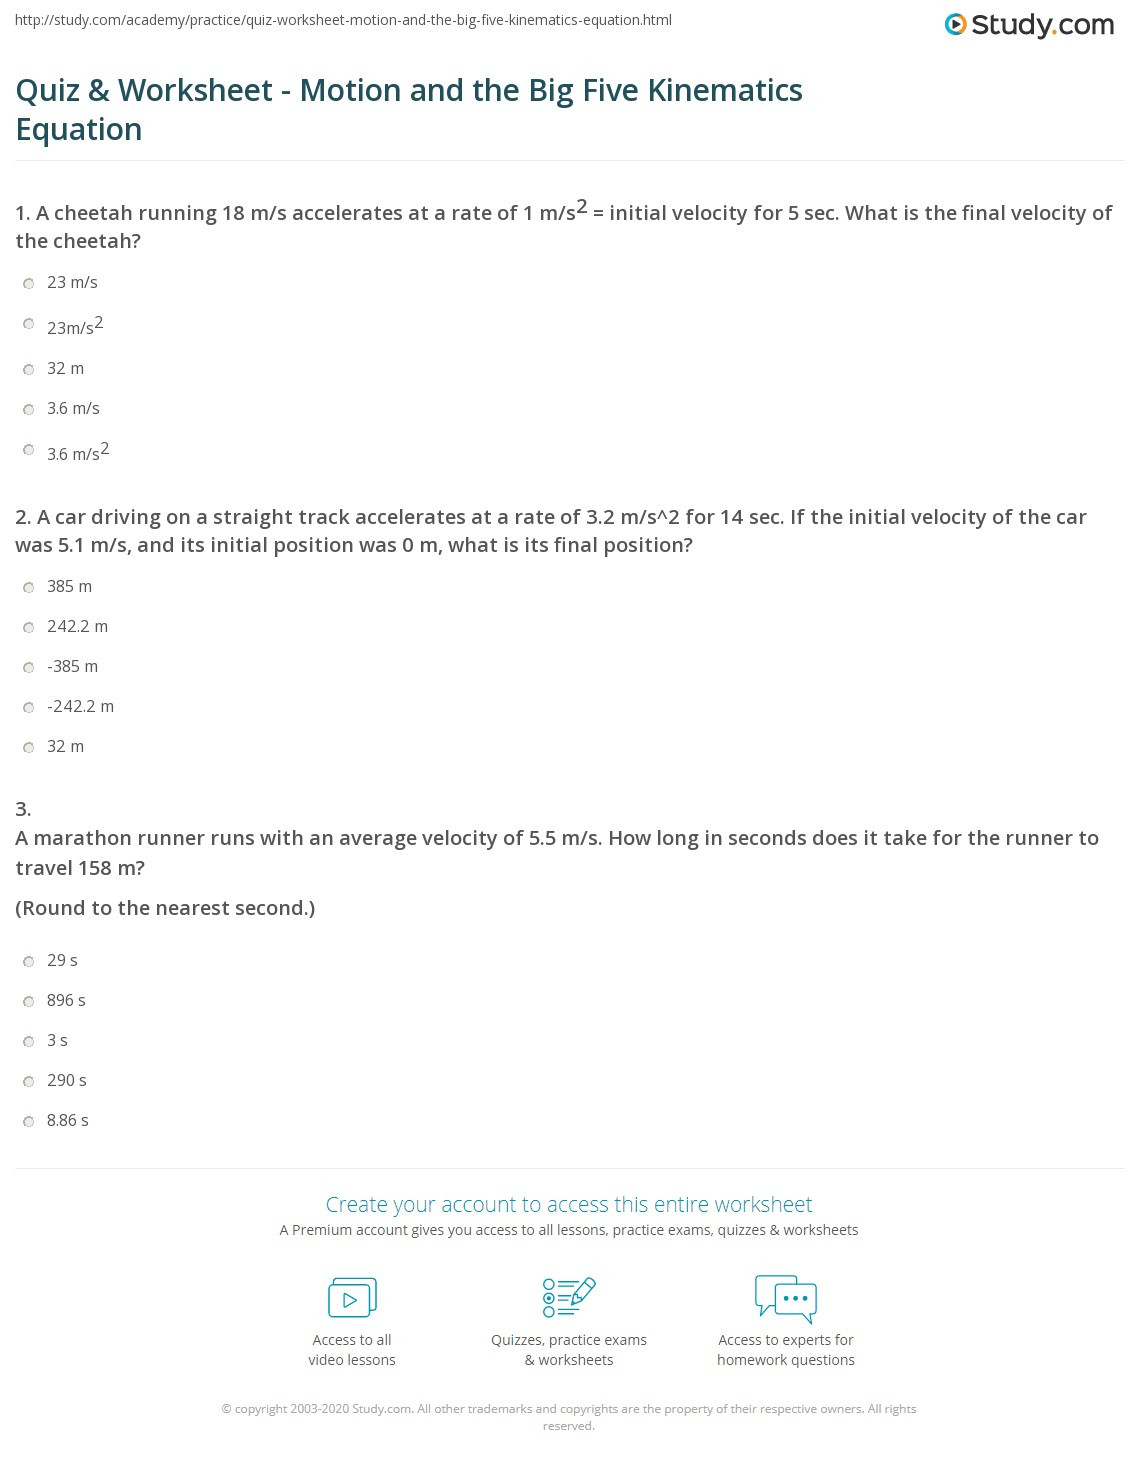 Velocity Worksheet with Answers Quiz &amp; Worksheet Motion and the Big Five Kinematics